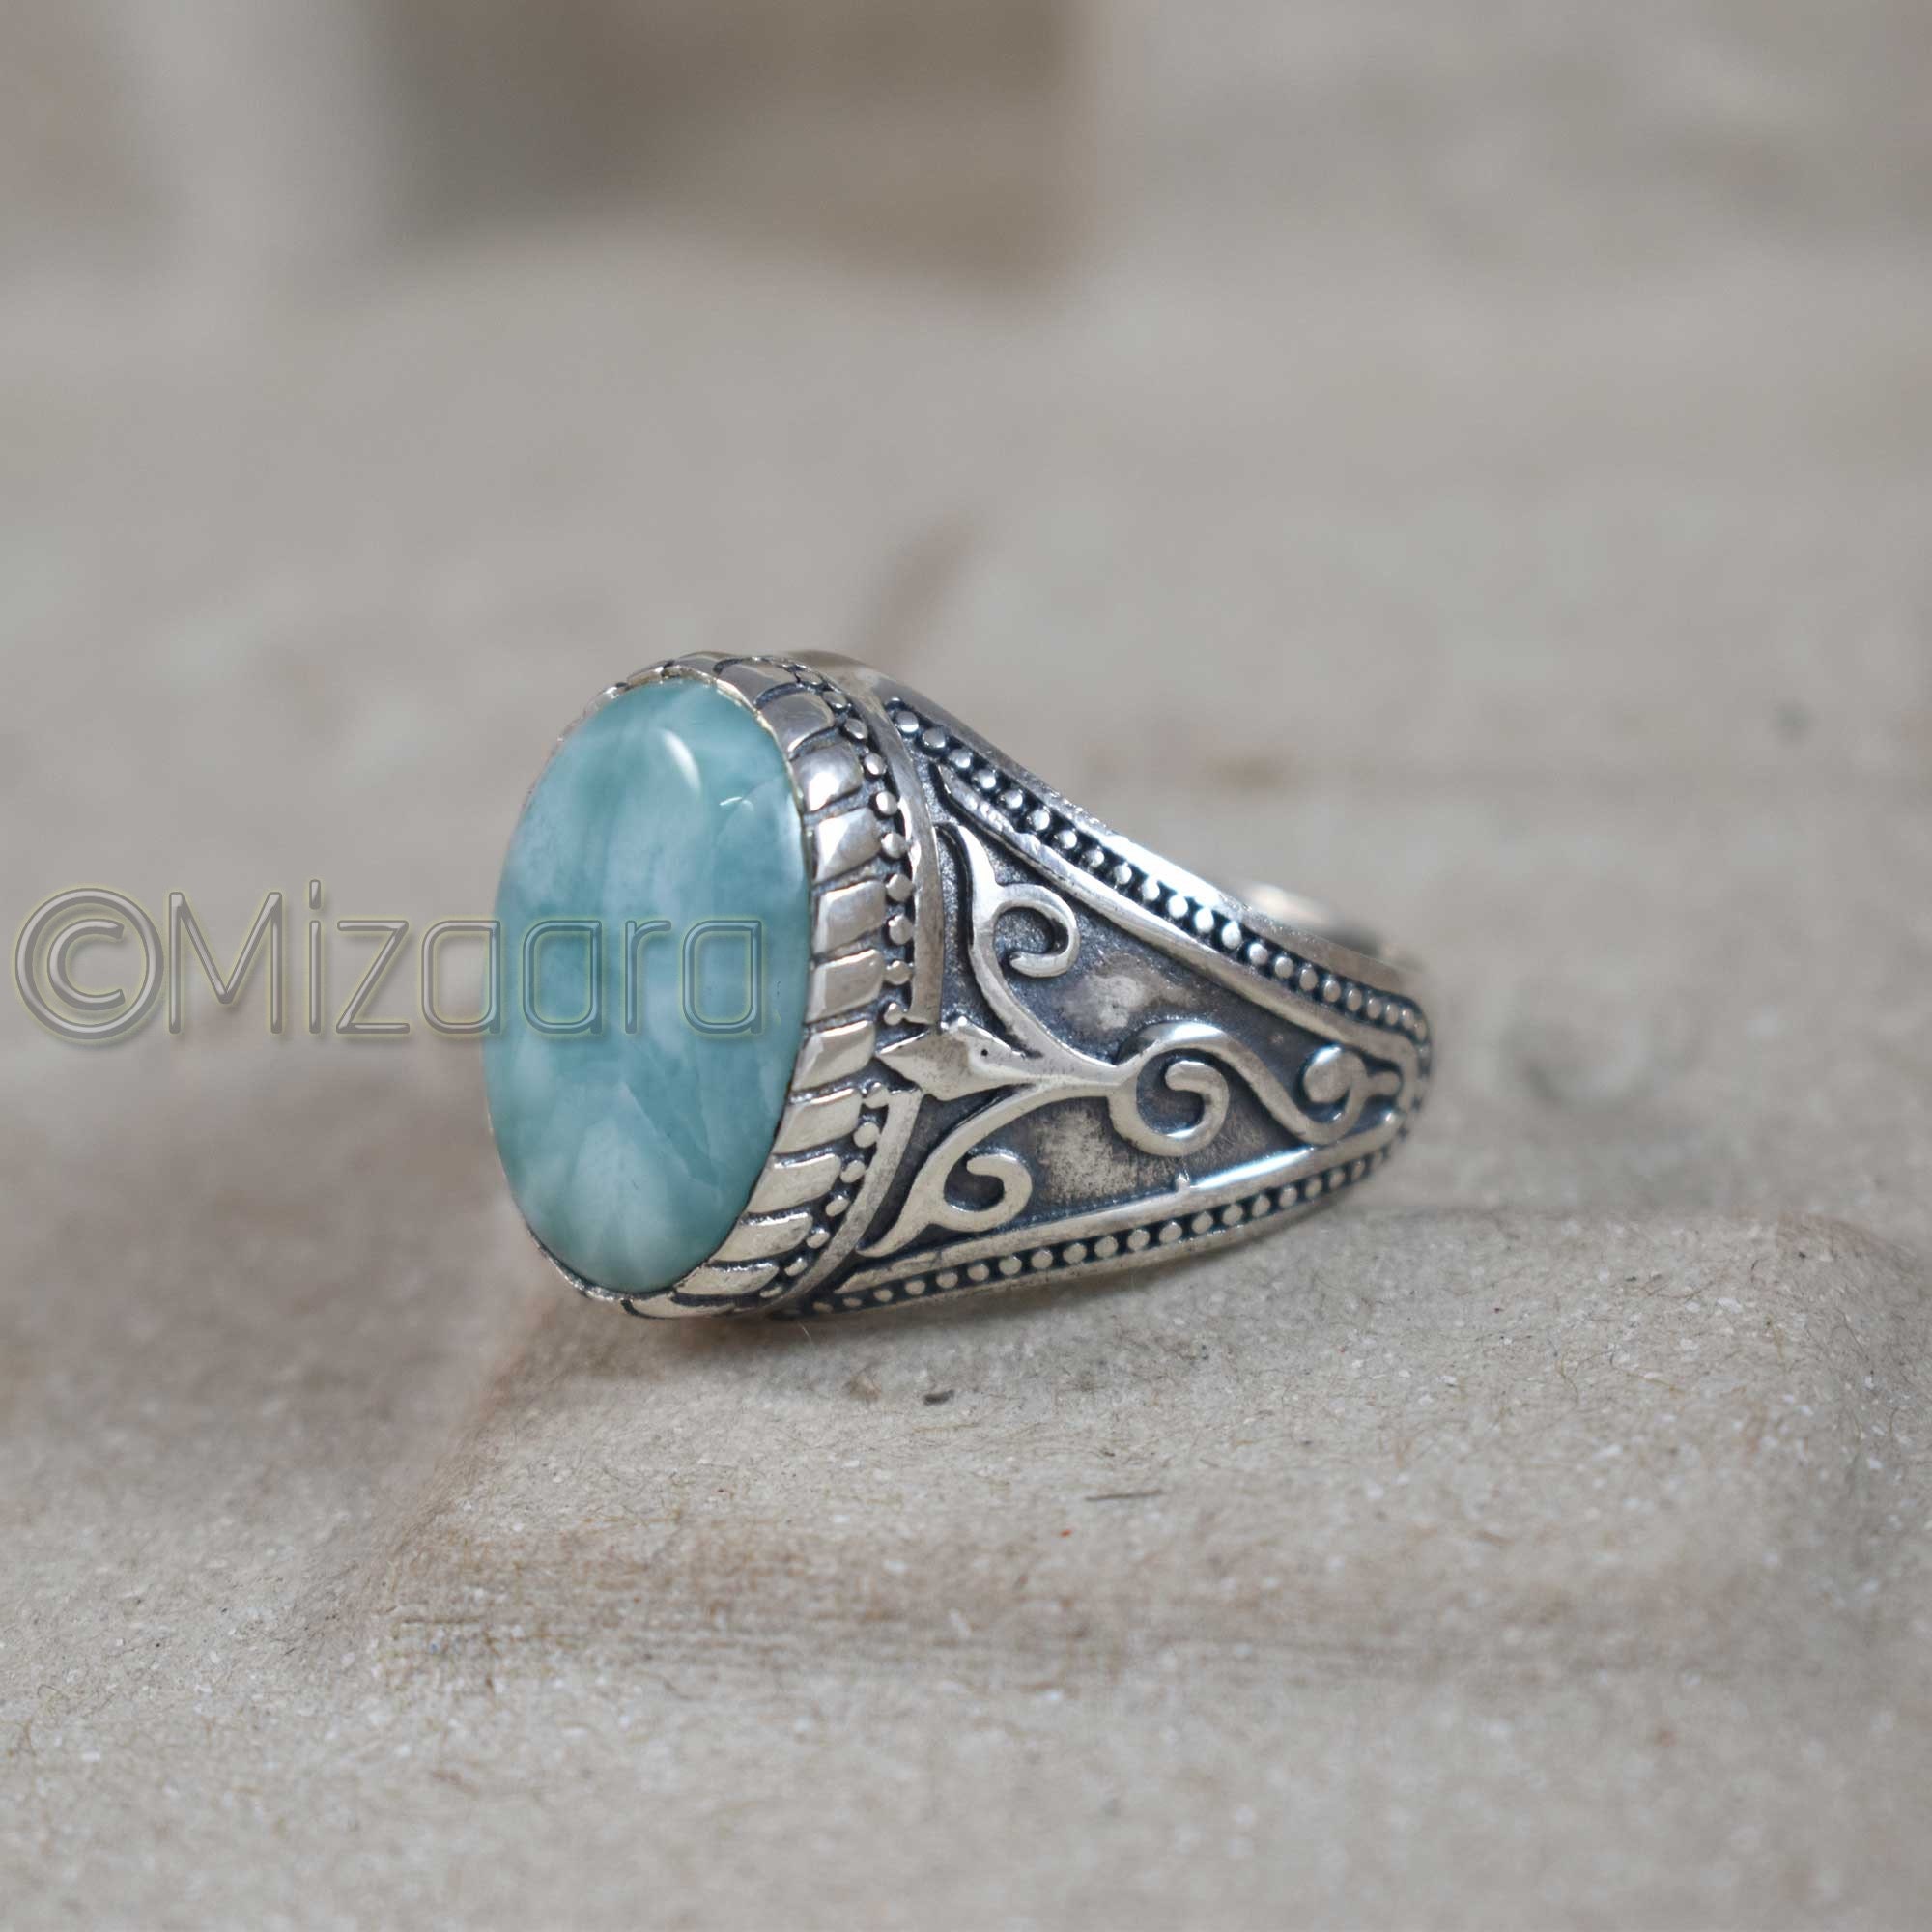 Dominican Larimar Pectolite Ring 925 Sterling Silver Middle Eastern Oxidized Blue Father's Day Gift Men's